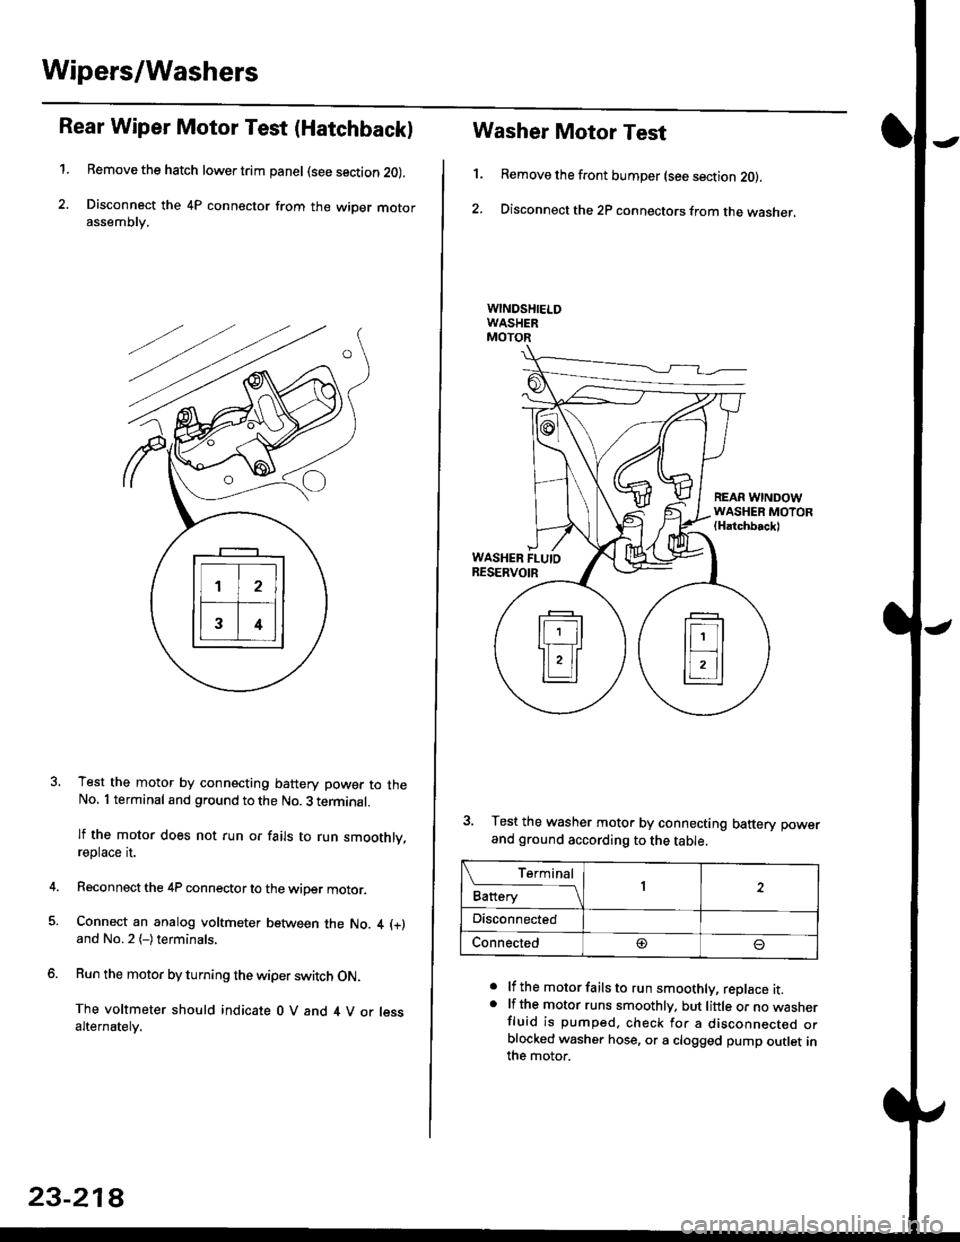 HONDA CIVIC 1999 6.G Workshop Manual Wipers/Washers
Rear Wiper Motor Test (Hatchback)
1.Remove the hatch lower trim panel (see section 20).
Disconnect the 4P connector from the wiper motorassemDry,
Test the motor by connecting battery po